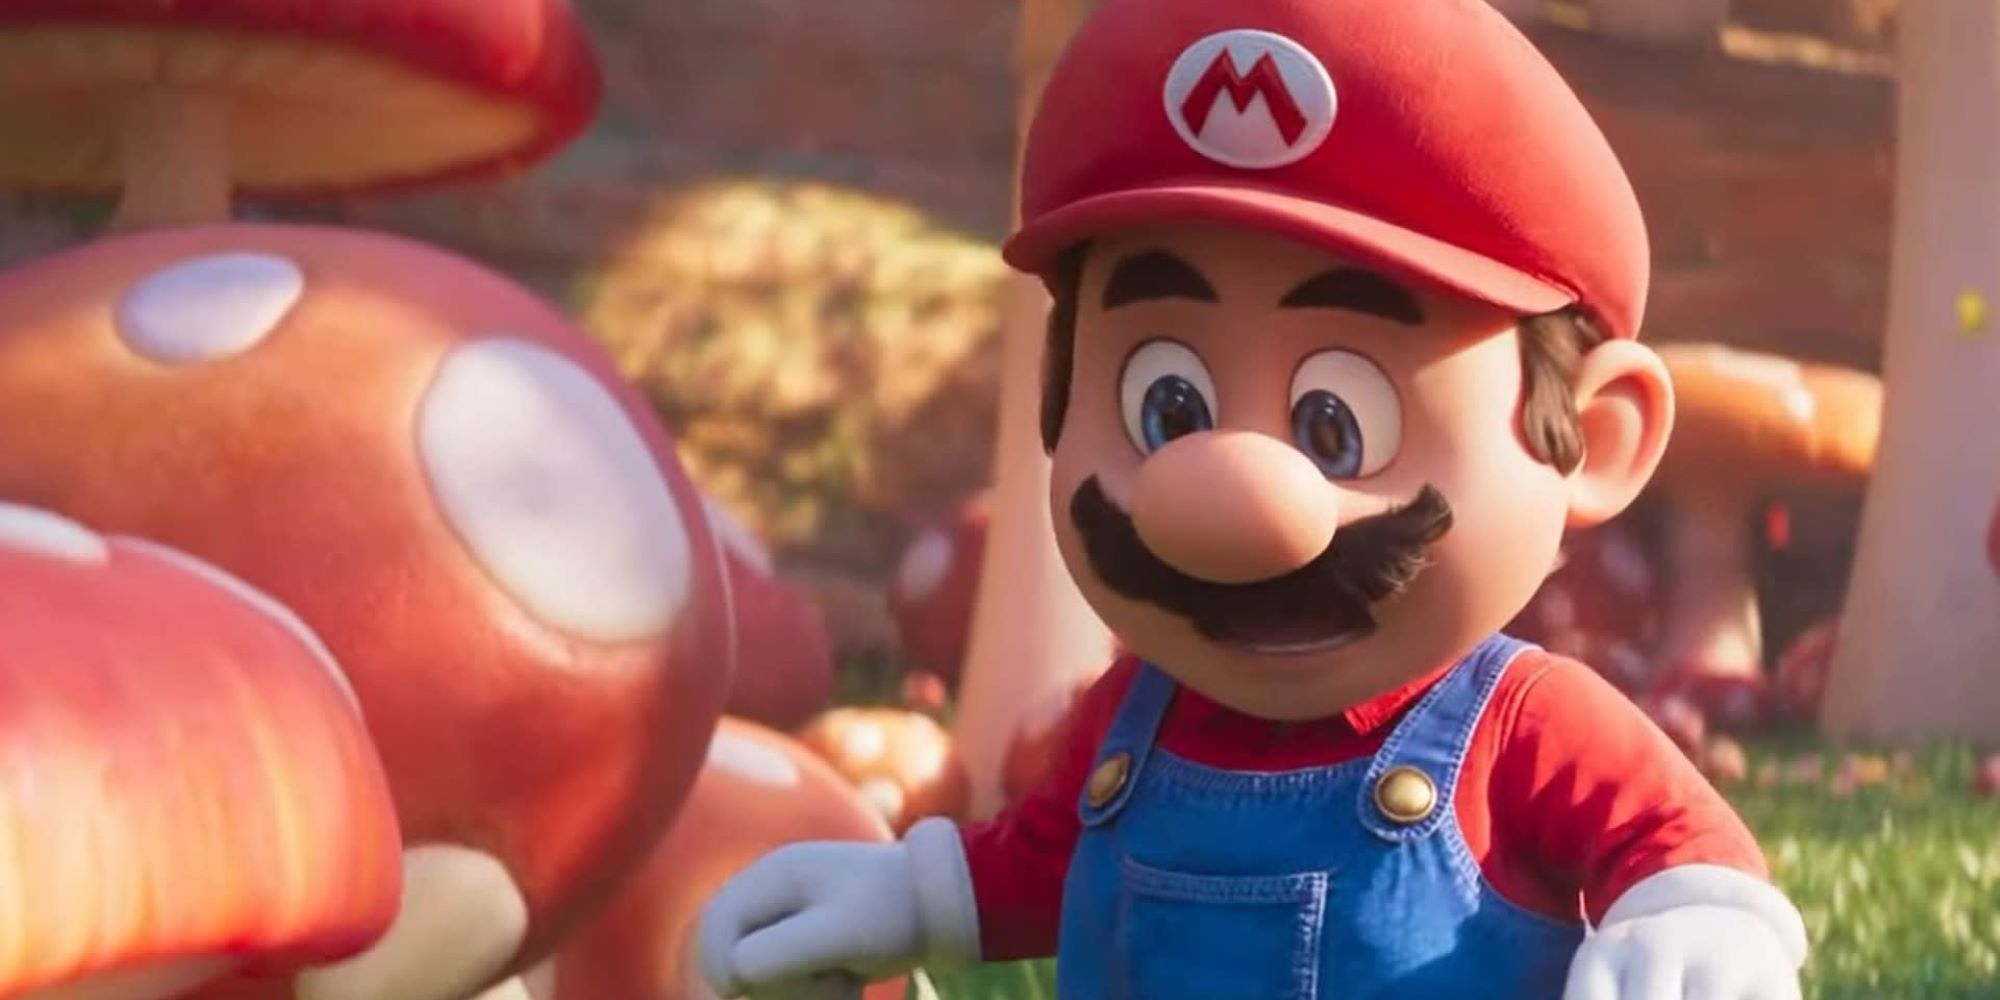 Still of Mario from the Super Mario Brothers Movie.